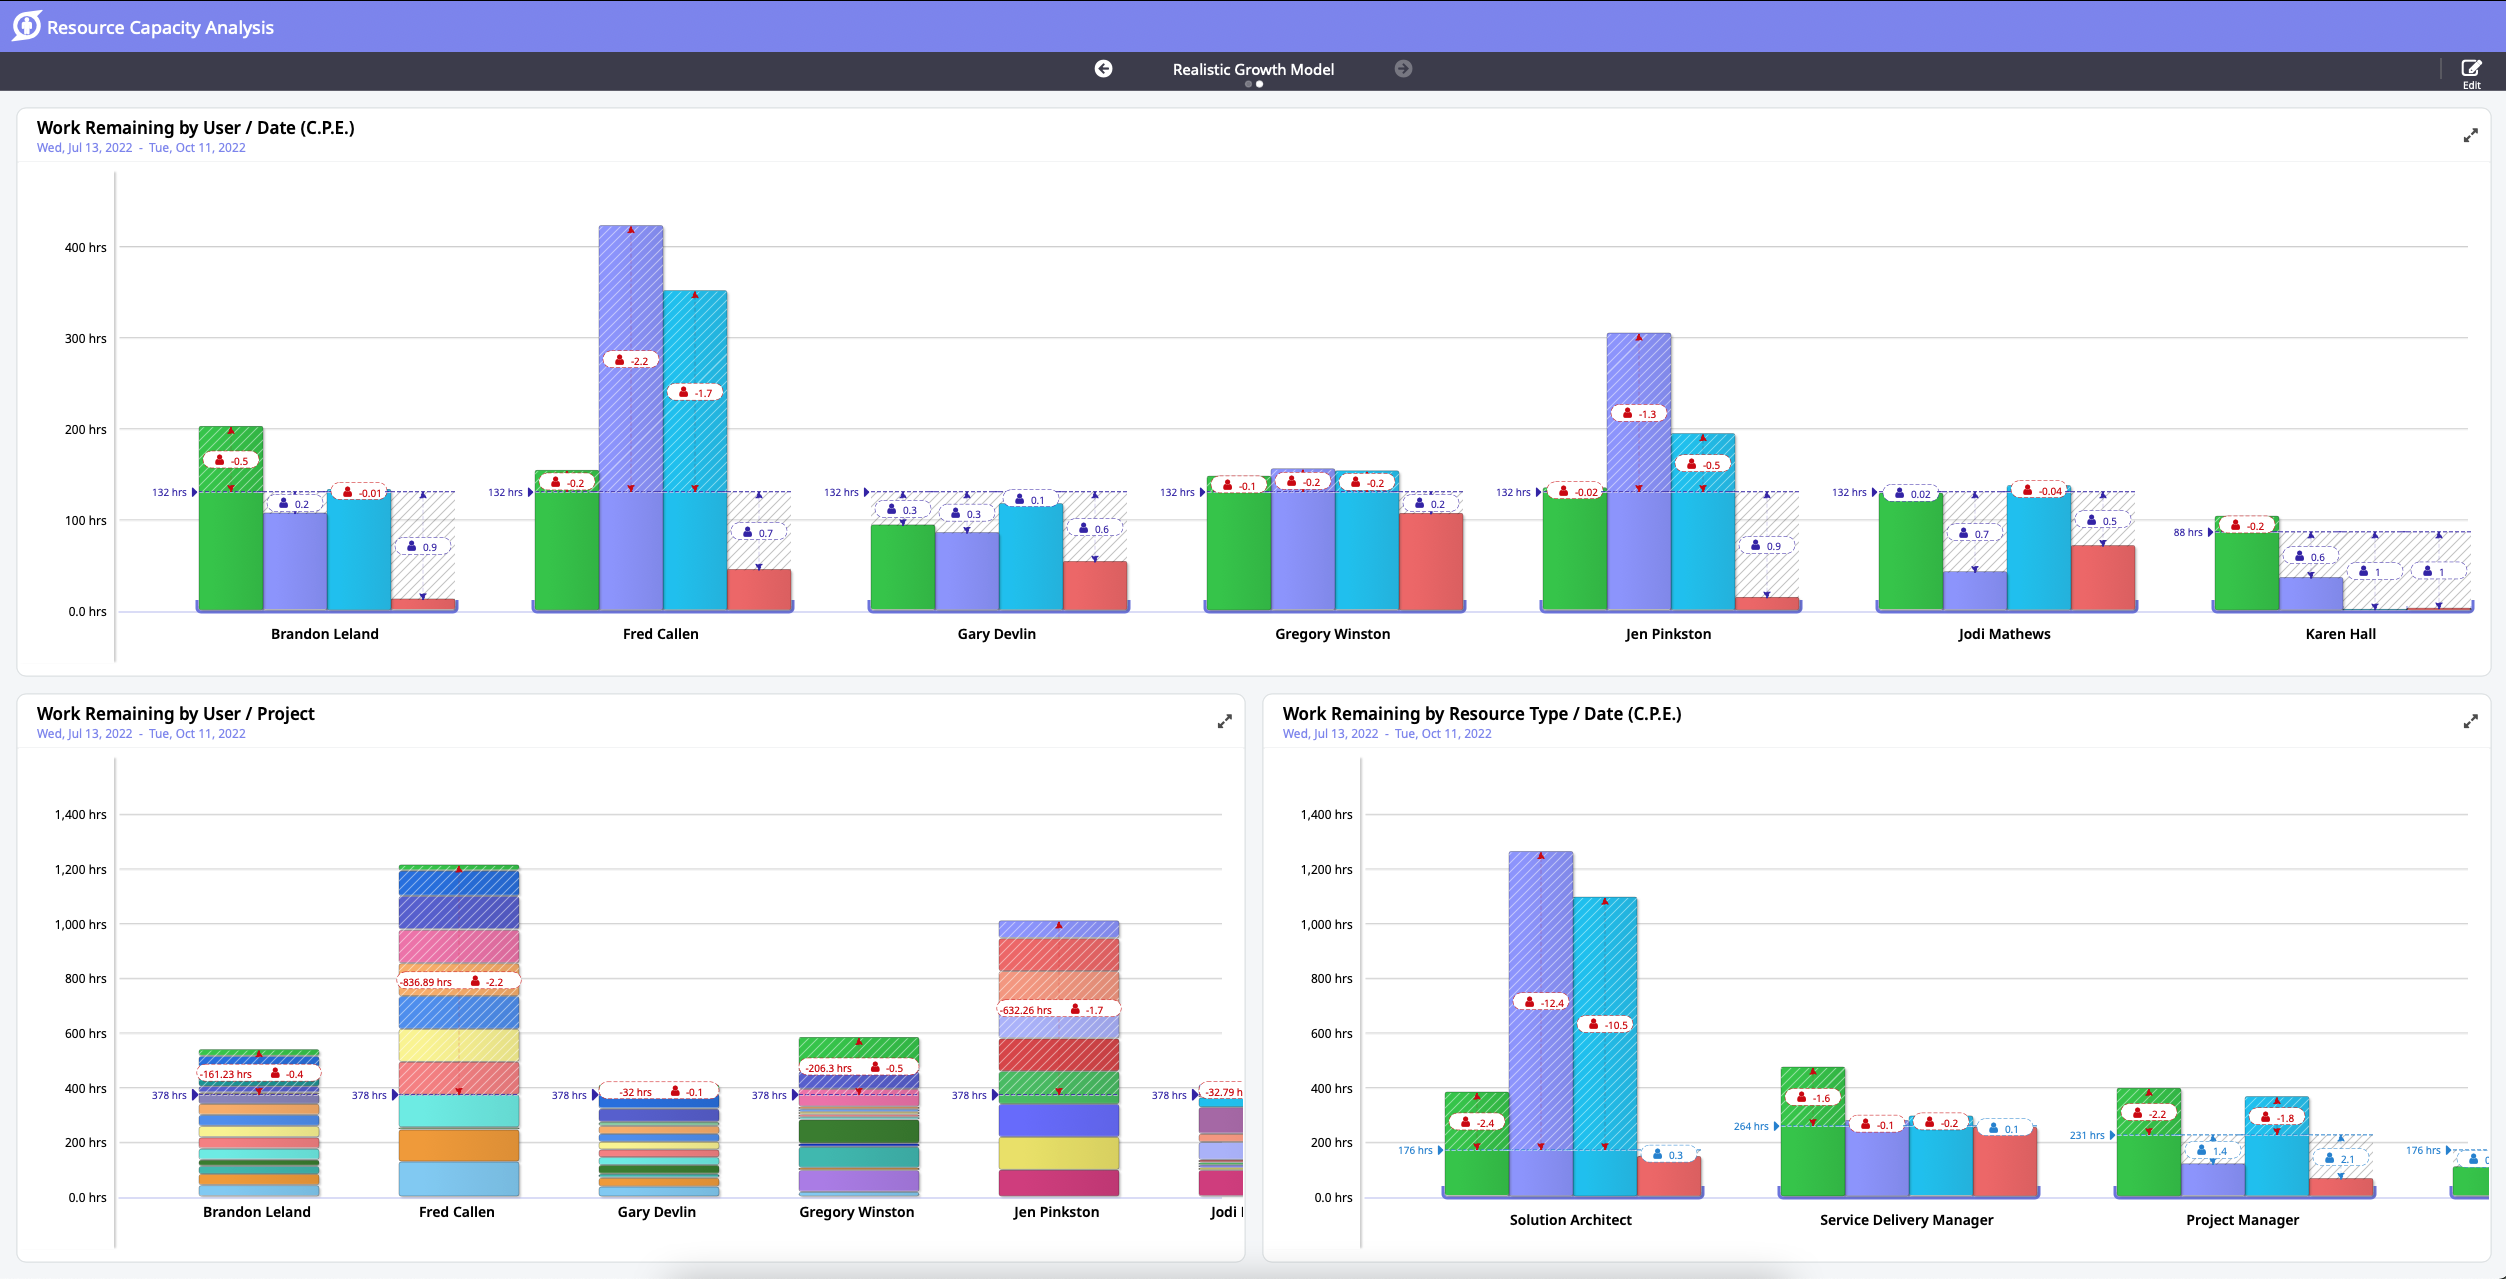 Moovila Software - Resource Capacity Analysis shows an accurate, complete, forward-looking view of capacity.